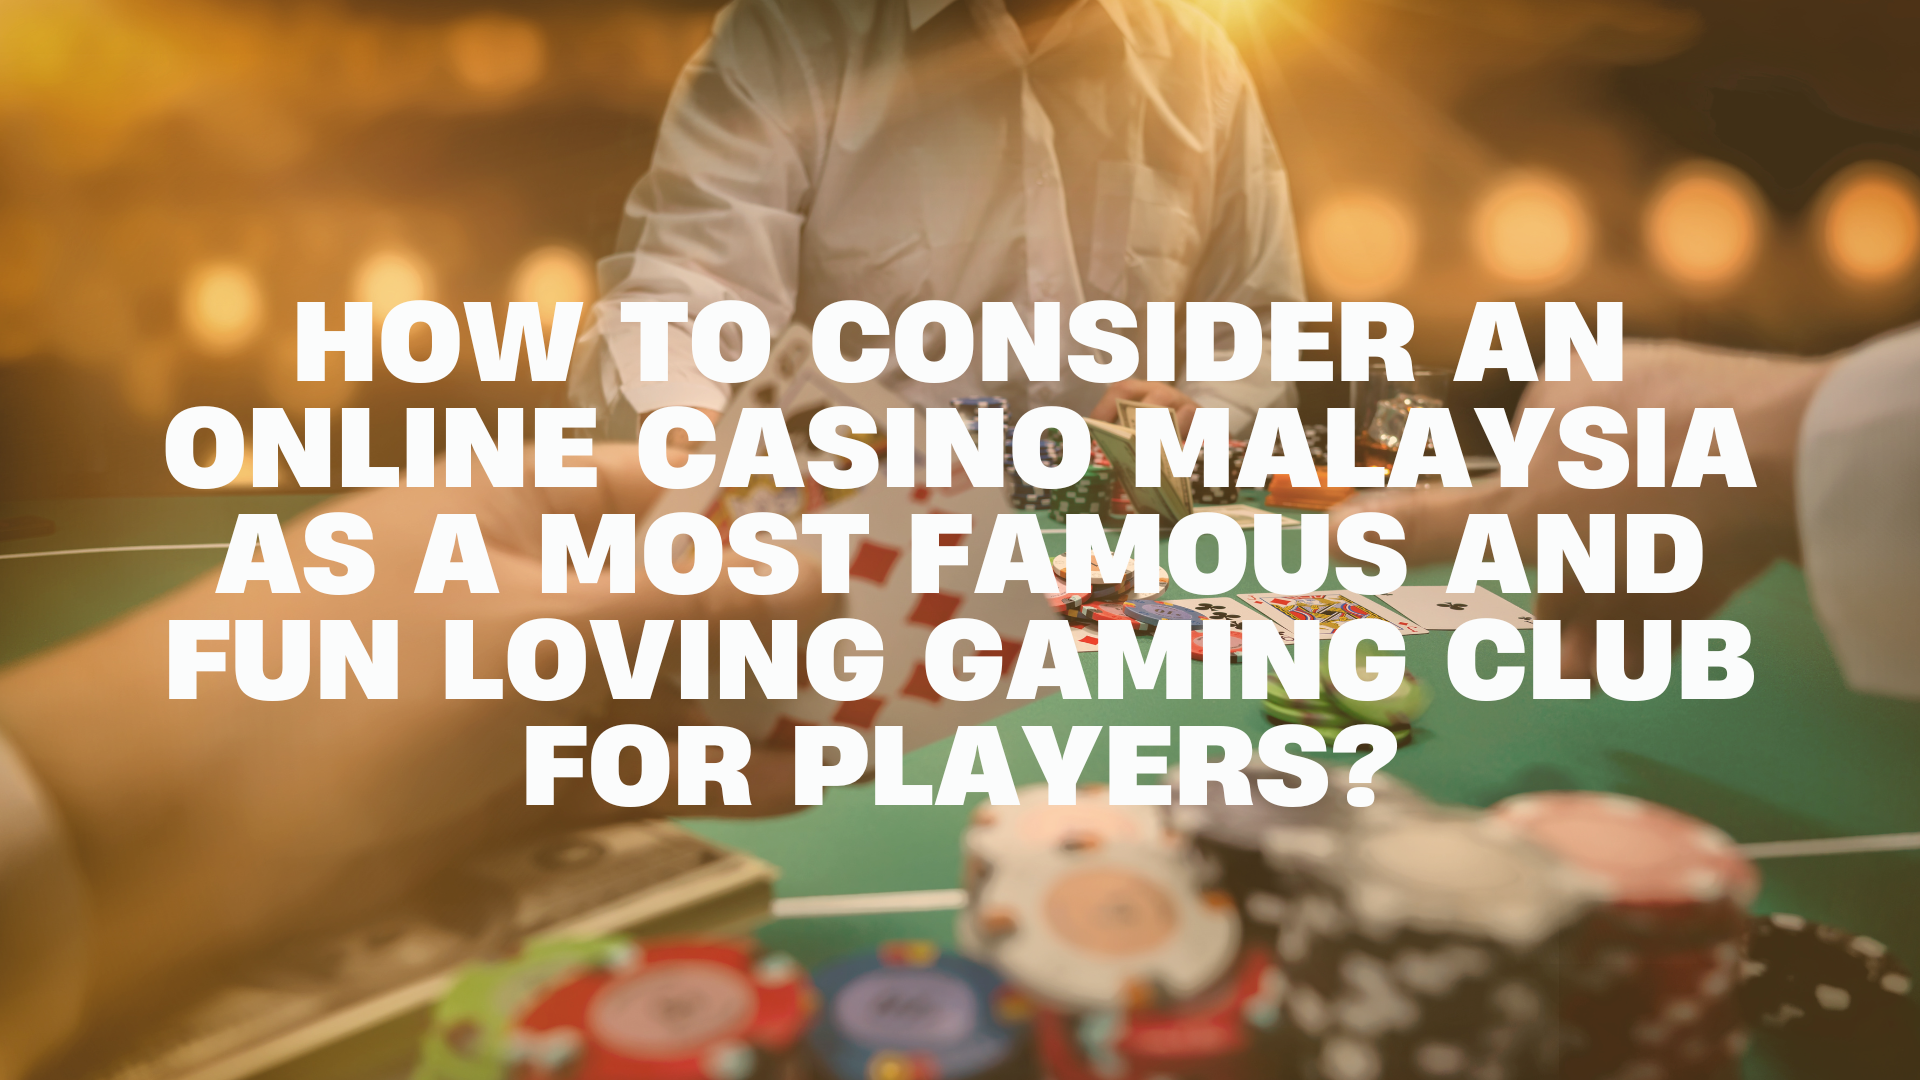 How to Consider an Online Casino Malaysia as a Most Famous and Fun Loving Gaming Club for Players